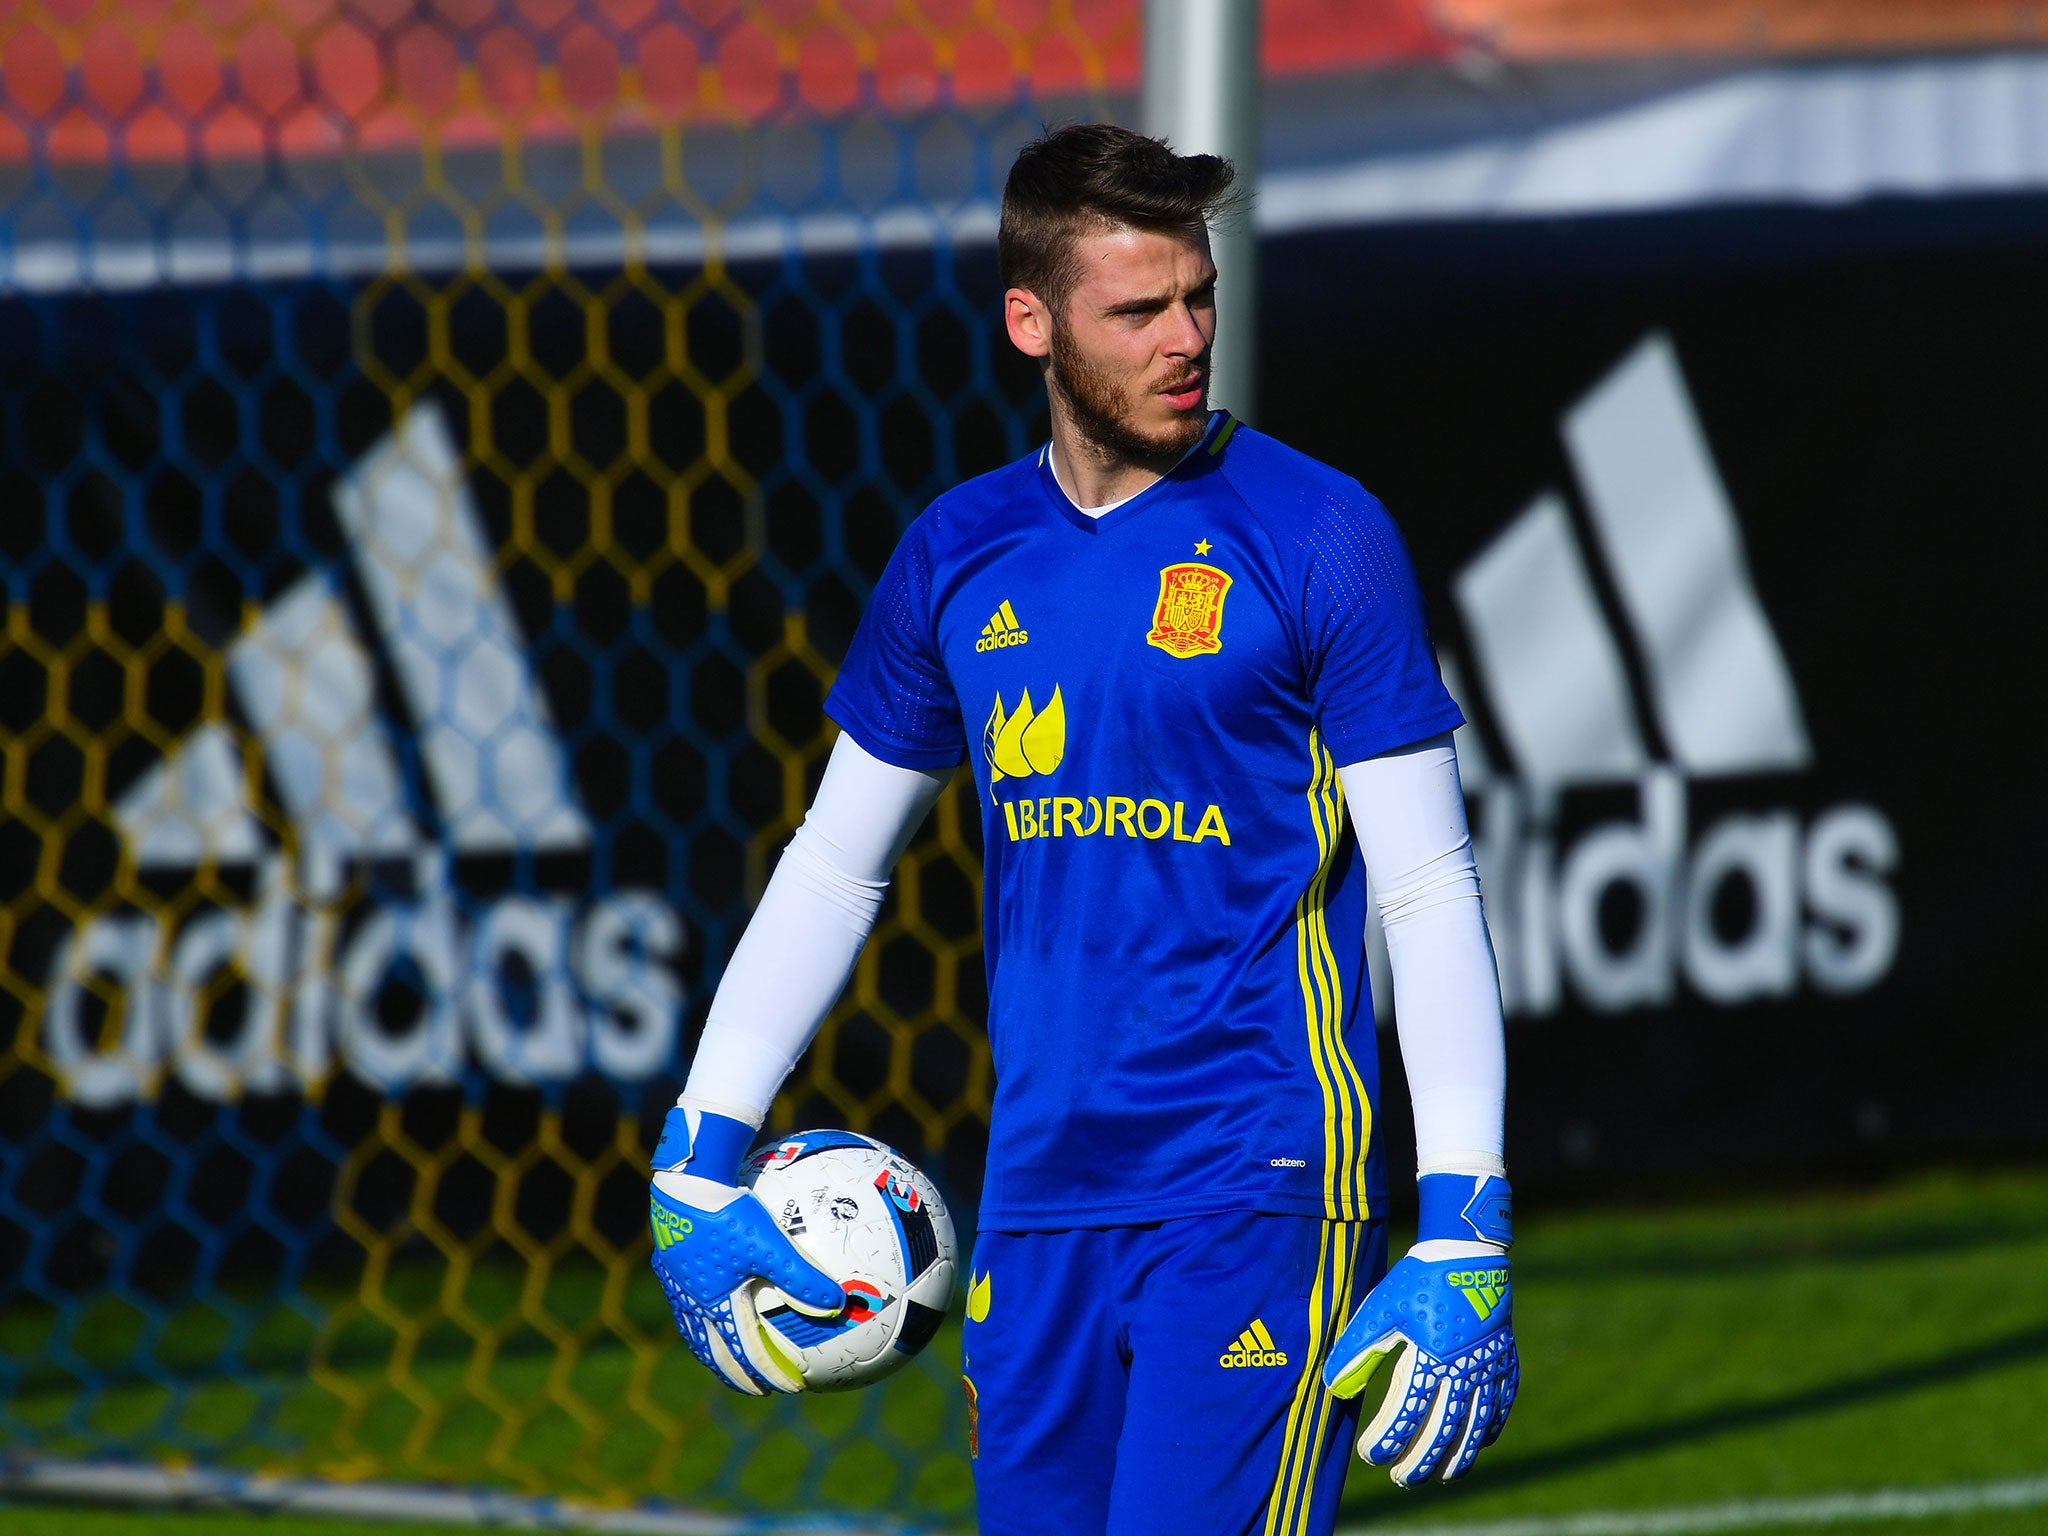 Manchester United goalkeeper David De Gea will hope to take his club form into the finals